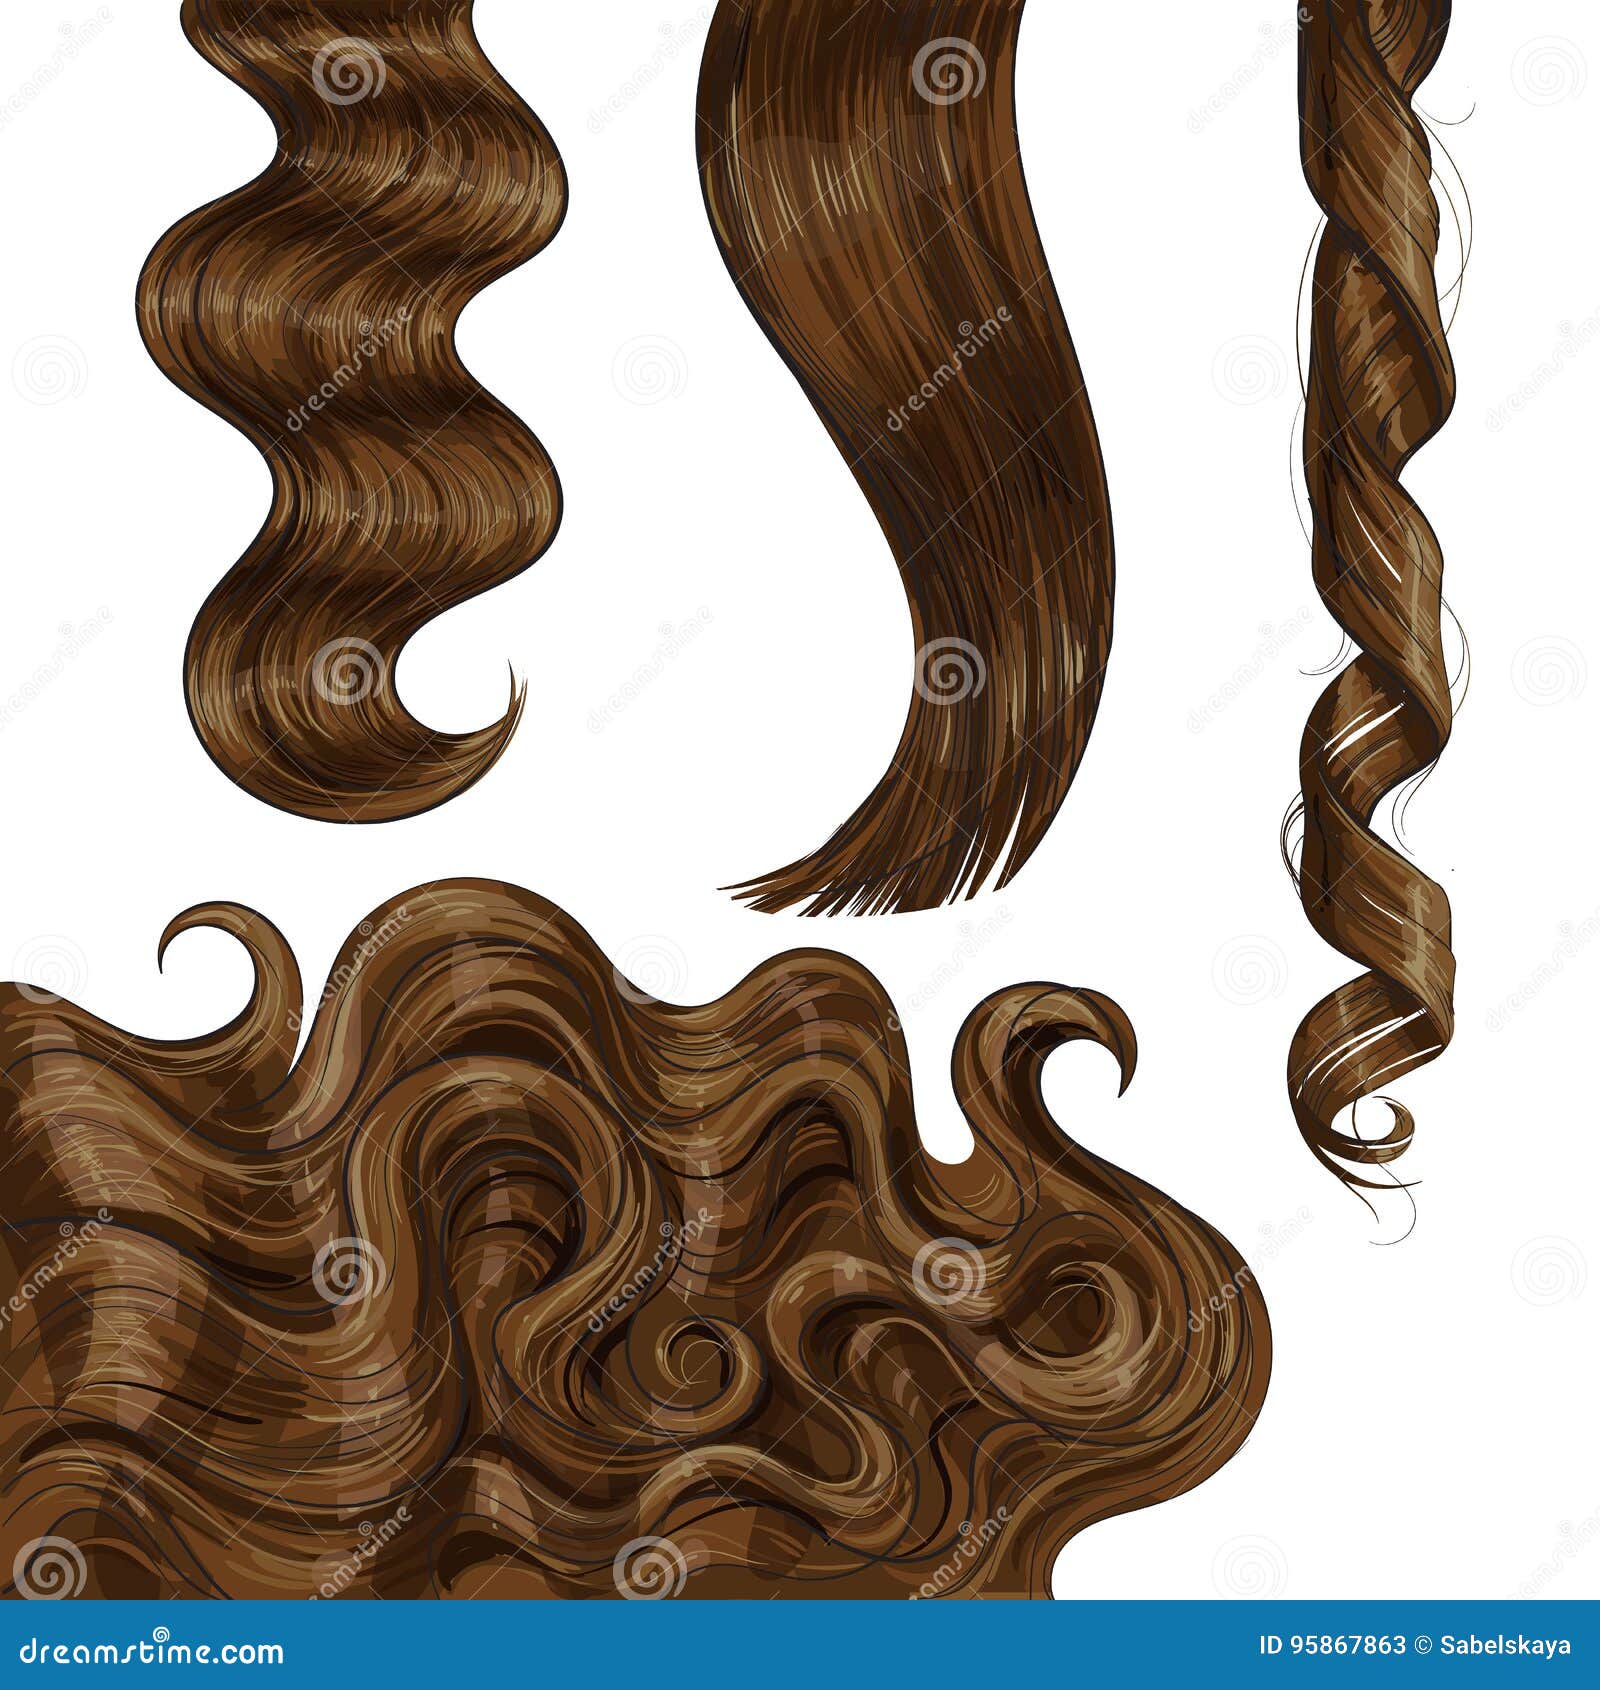 Long Wavy Hair: Over 12,600 Royalty-Free Licensable Stock Illustrations &  Drawings